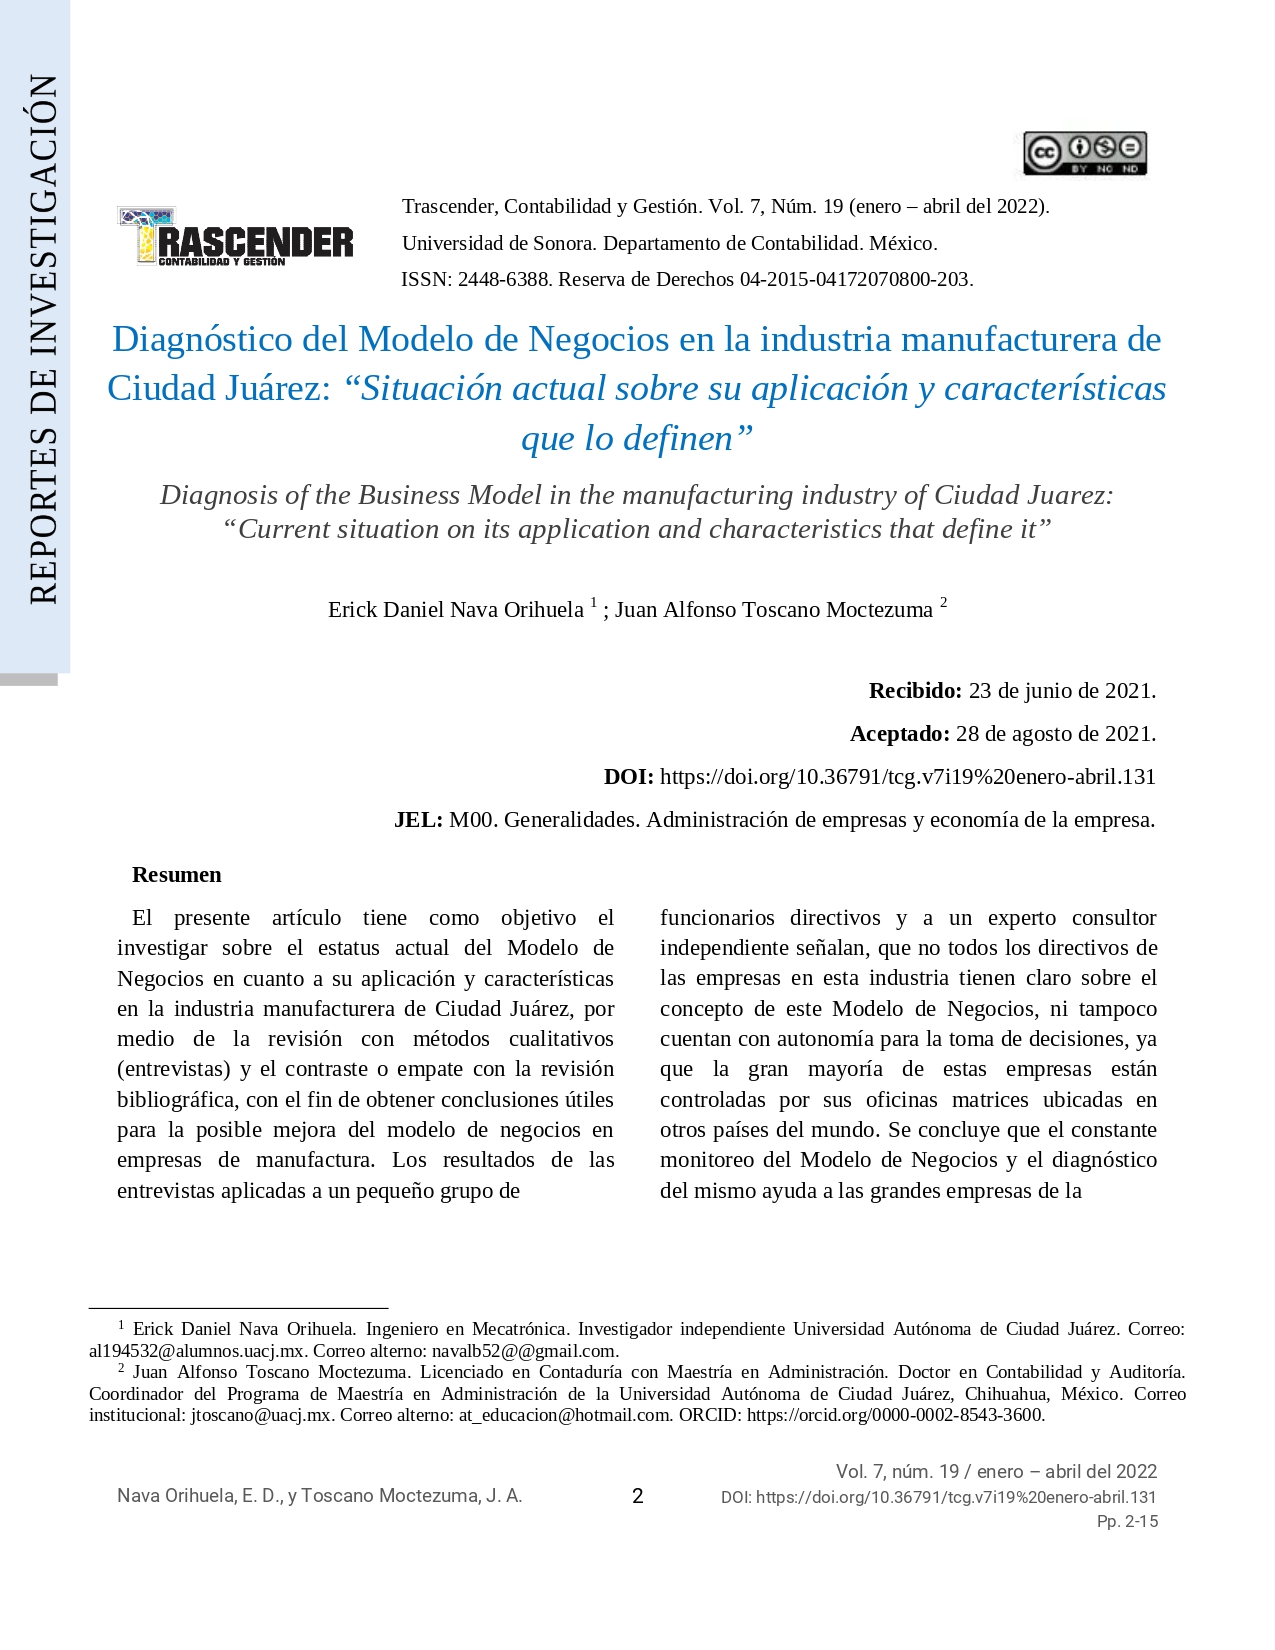 Diagnosis of the Business Model in the manufacturing industry of Ciudad Juarez